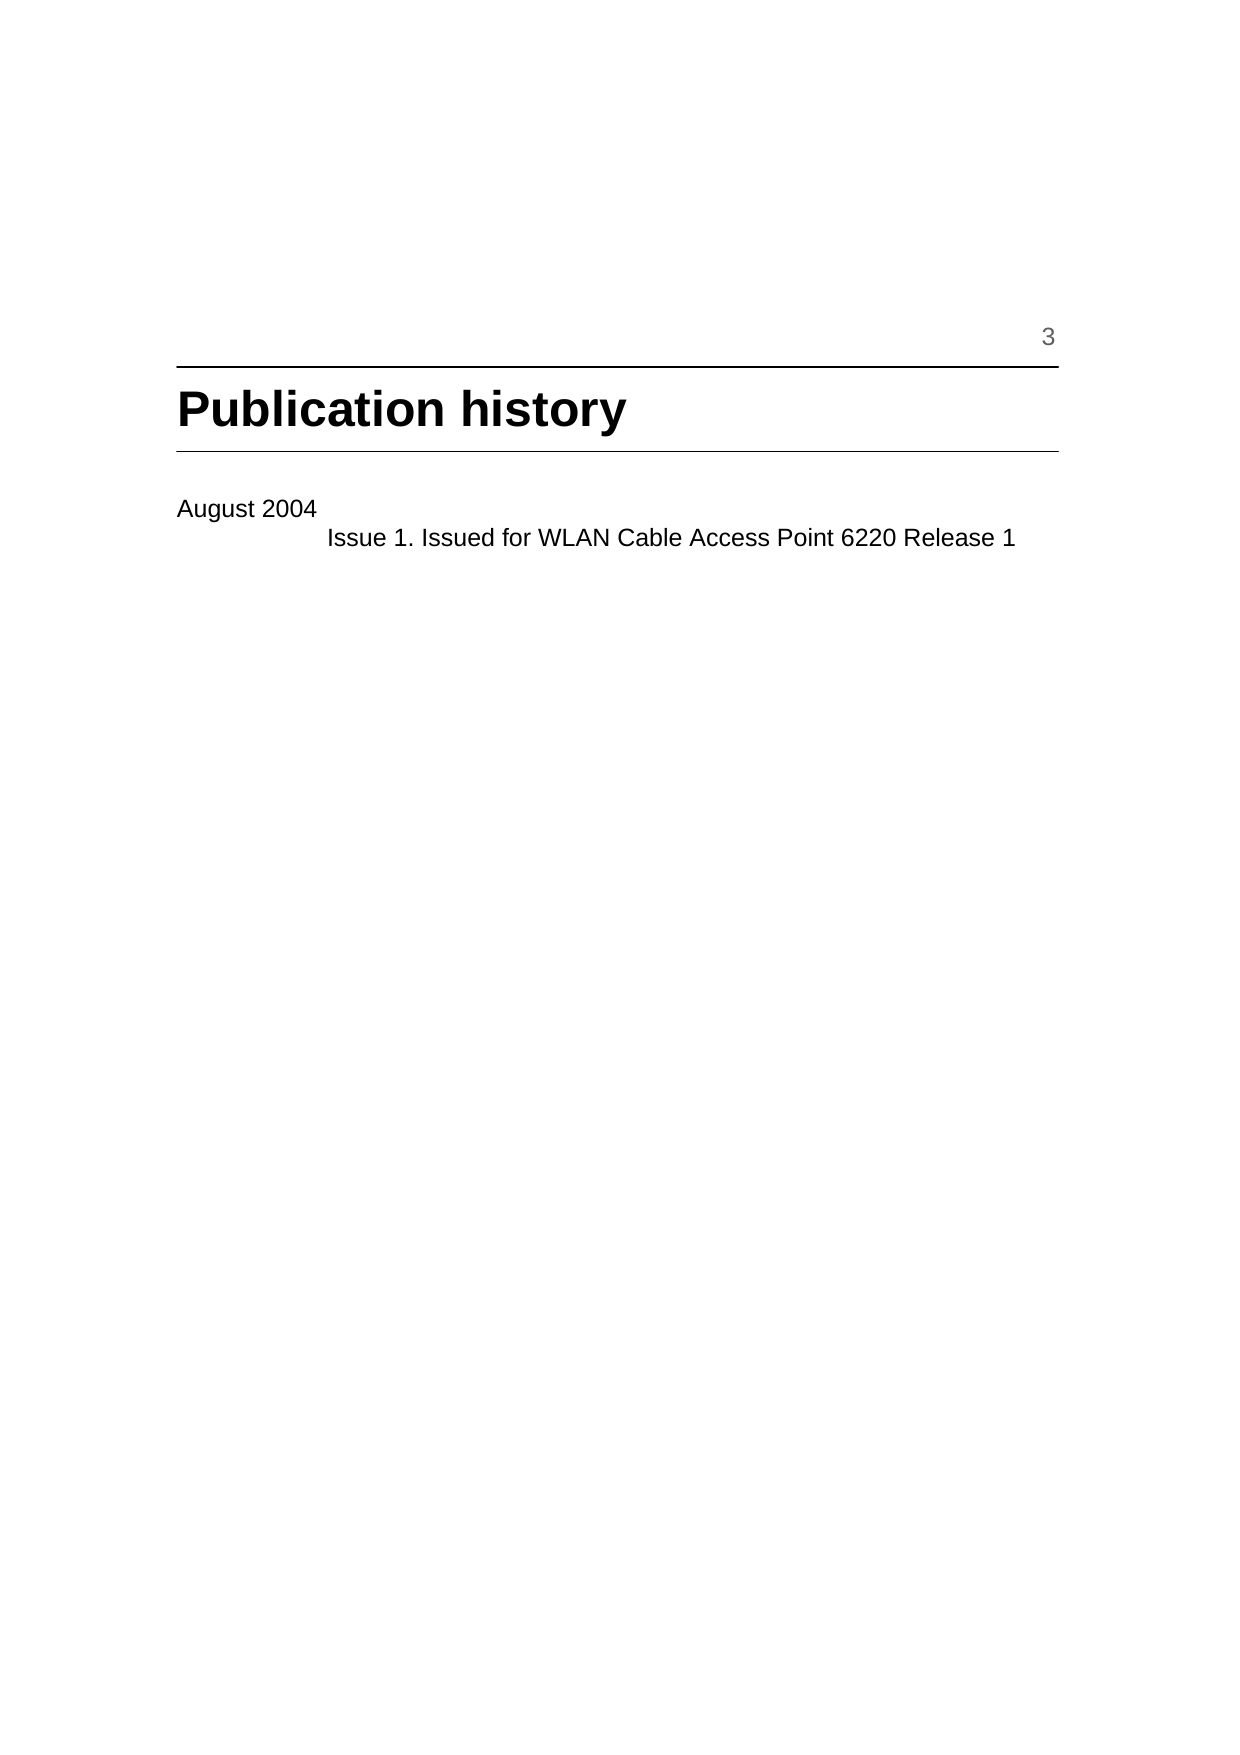     3  Publication history   August 2004     Issue 1. Issued for WLAN Cable Access Point 6220 Release 1                                    